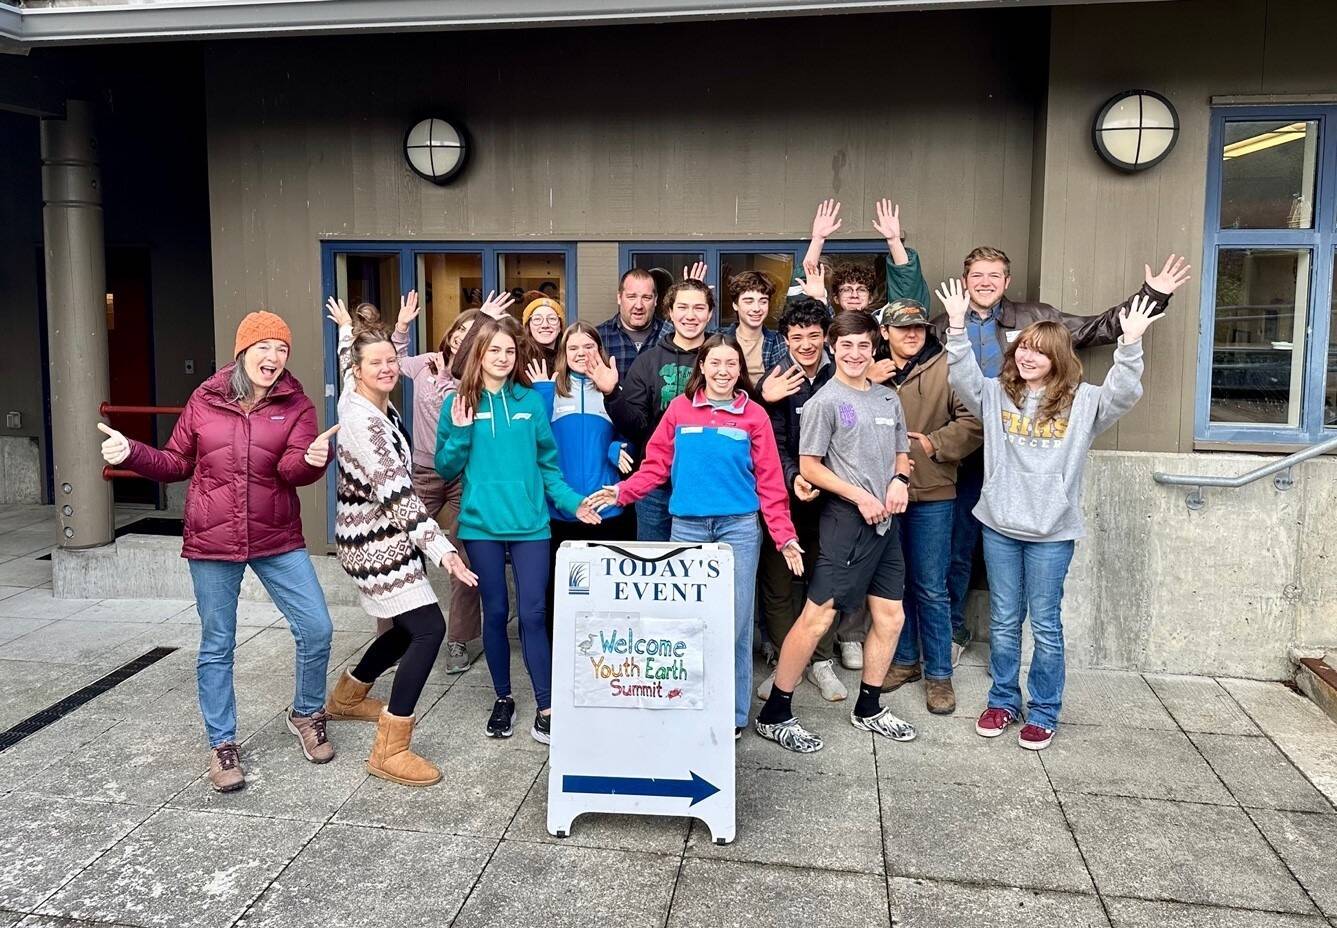 Contributed photo
Katie, Jess and Mr. Garson, along with 13 enthusiastic Friday Harbor High School students at the Youth Earth Summit.